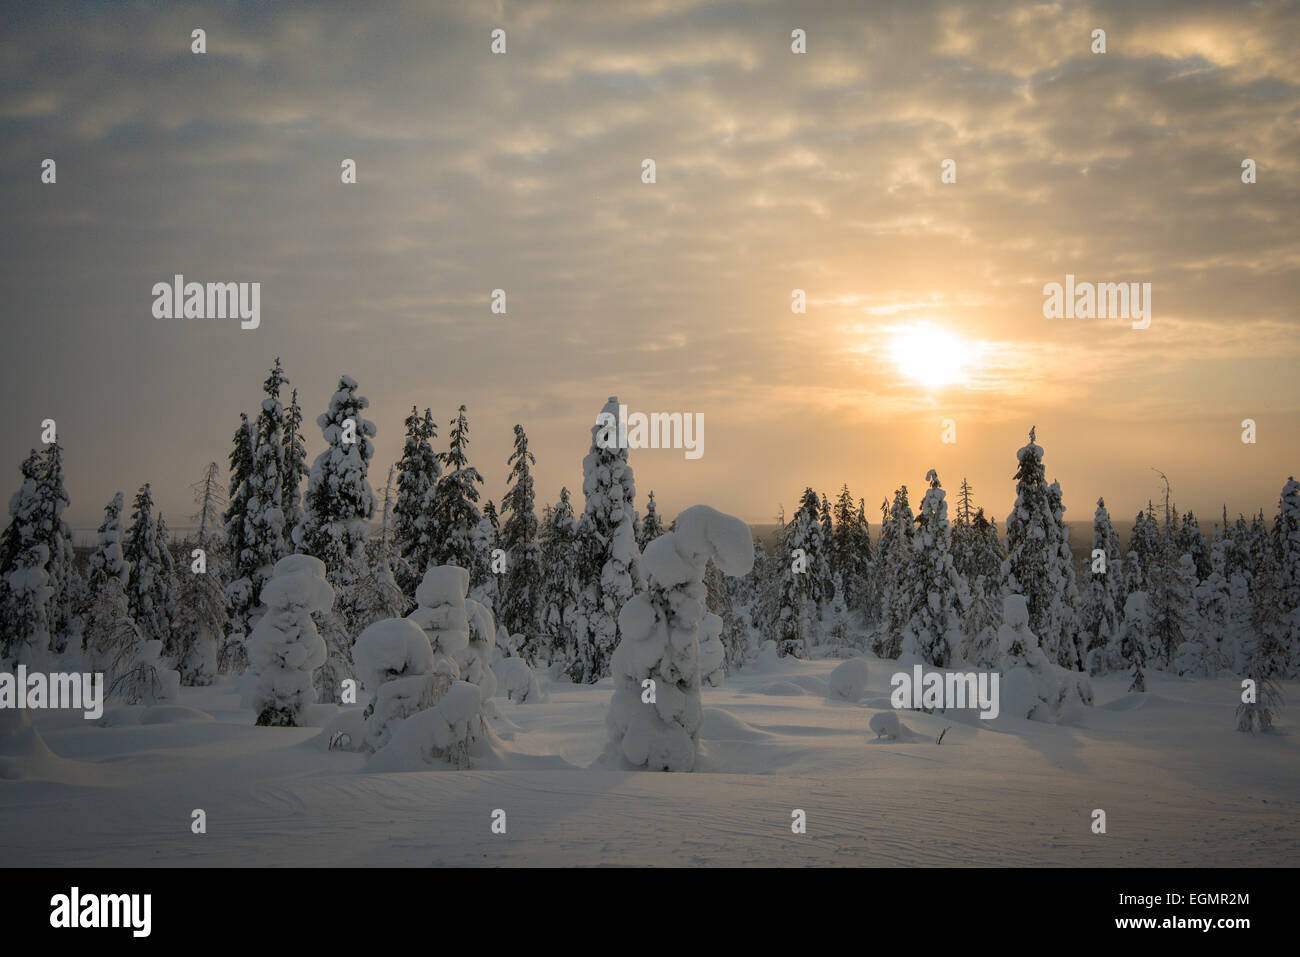 Snow-covered spruces, Fjell in winter, Riisitunturi National Park, Posio, Lapland, Finland Stock Photo